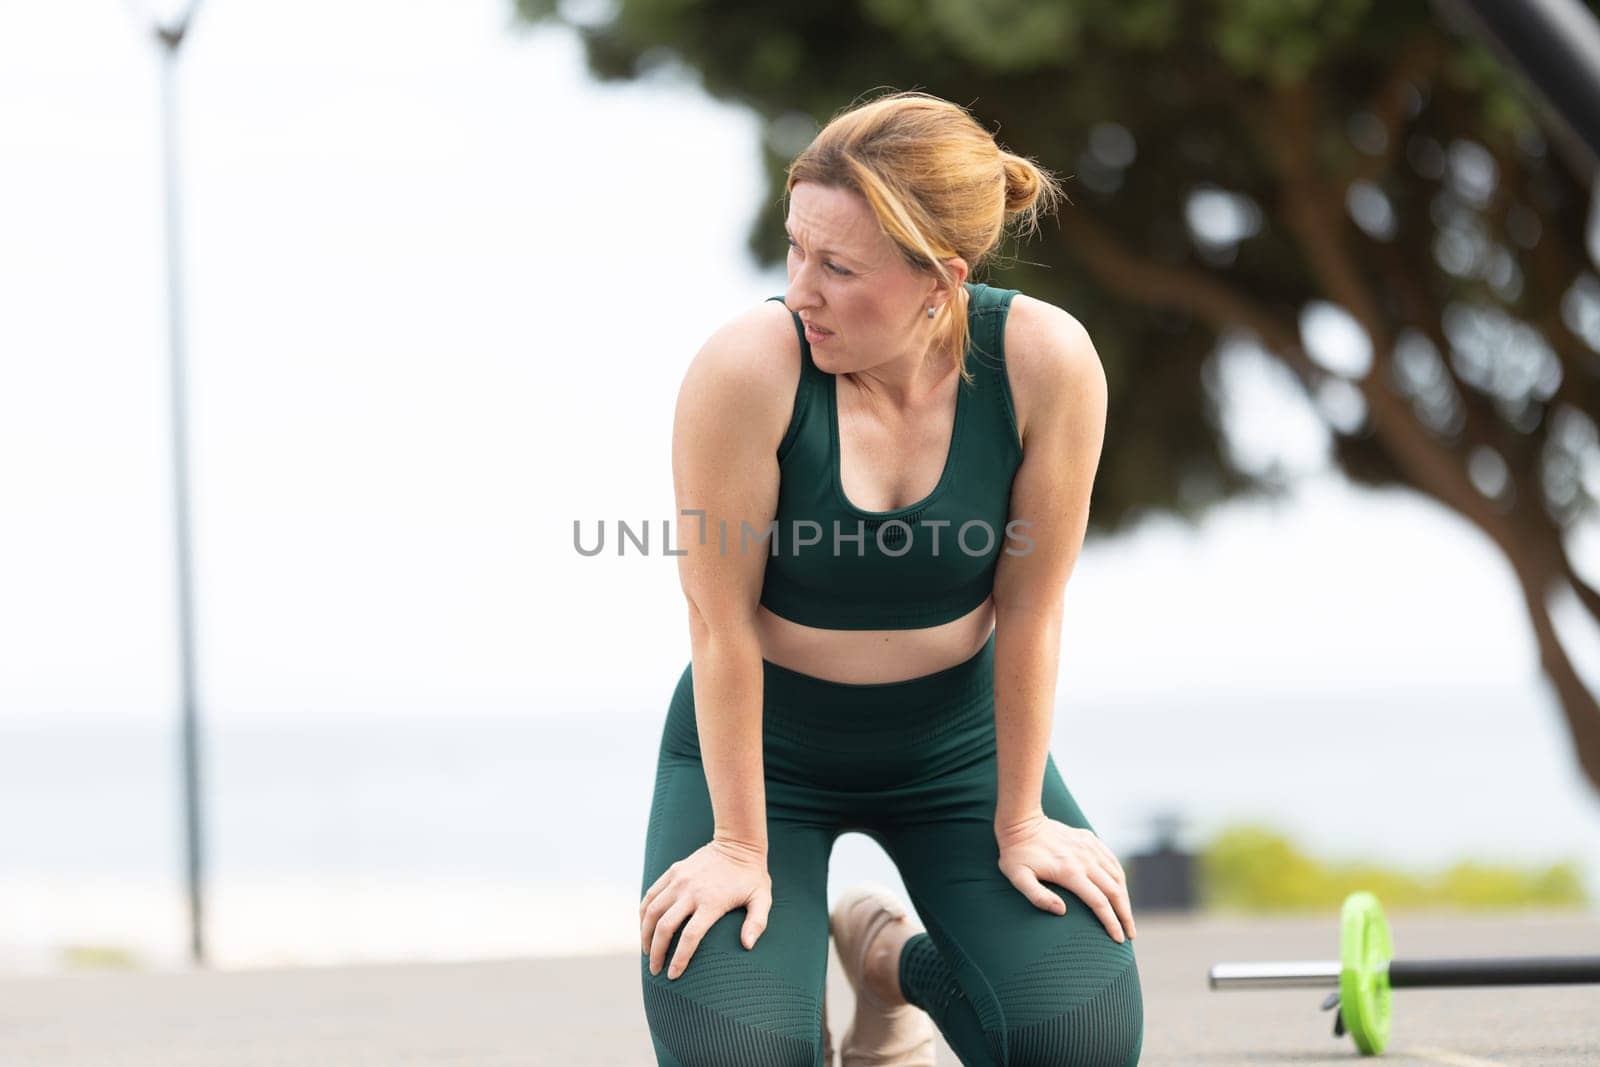 Adult sportive woman with no make up doing fitness outdoors. Mid shot